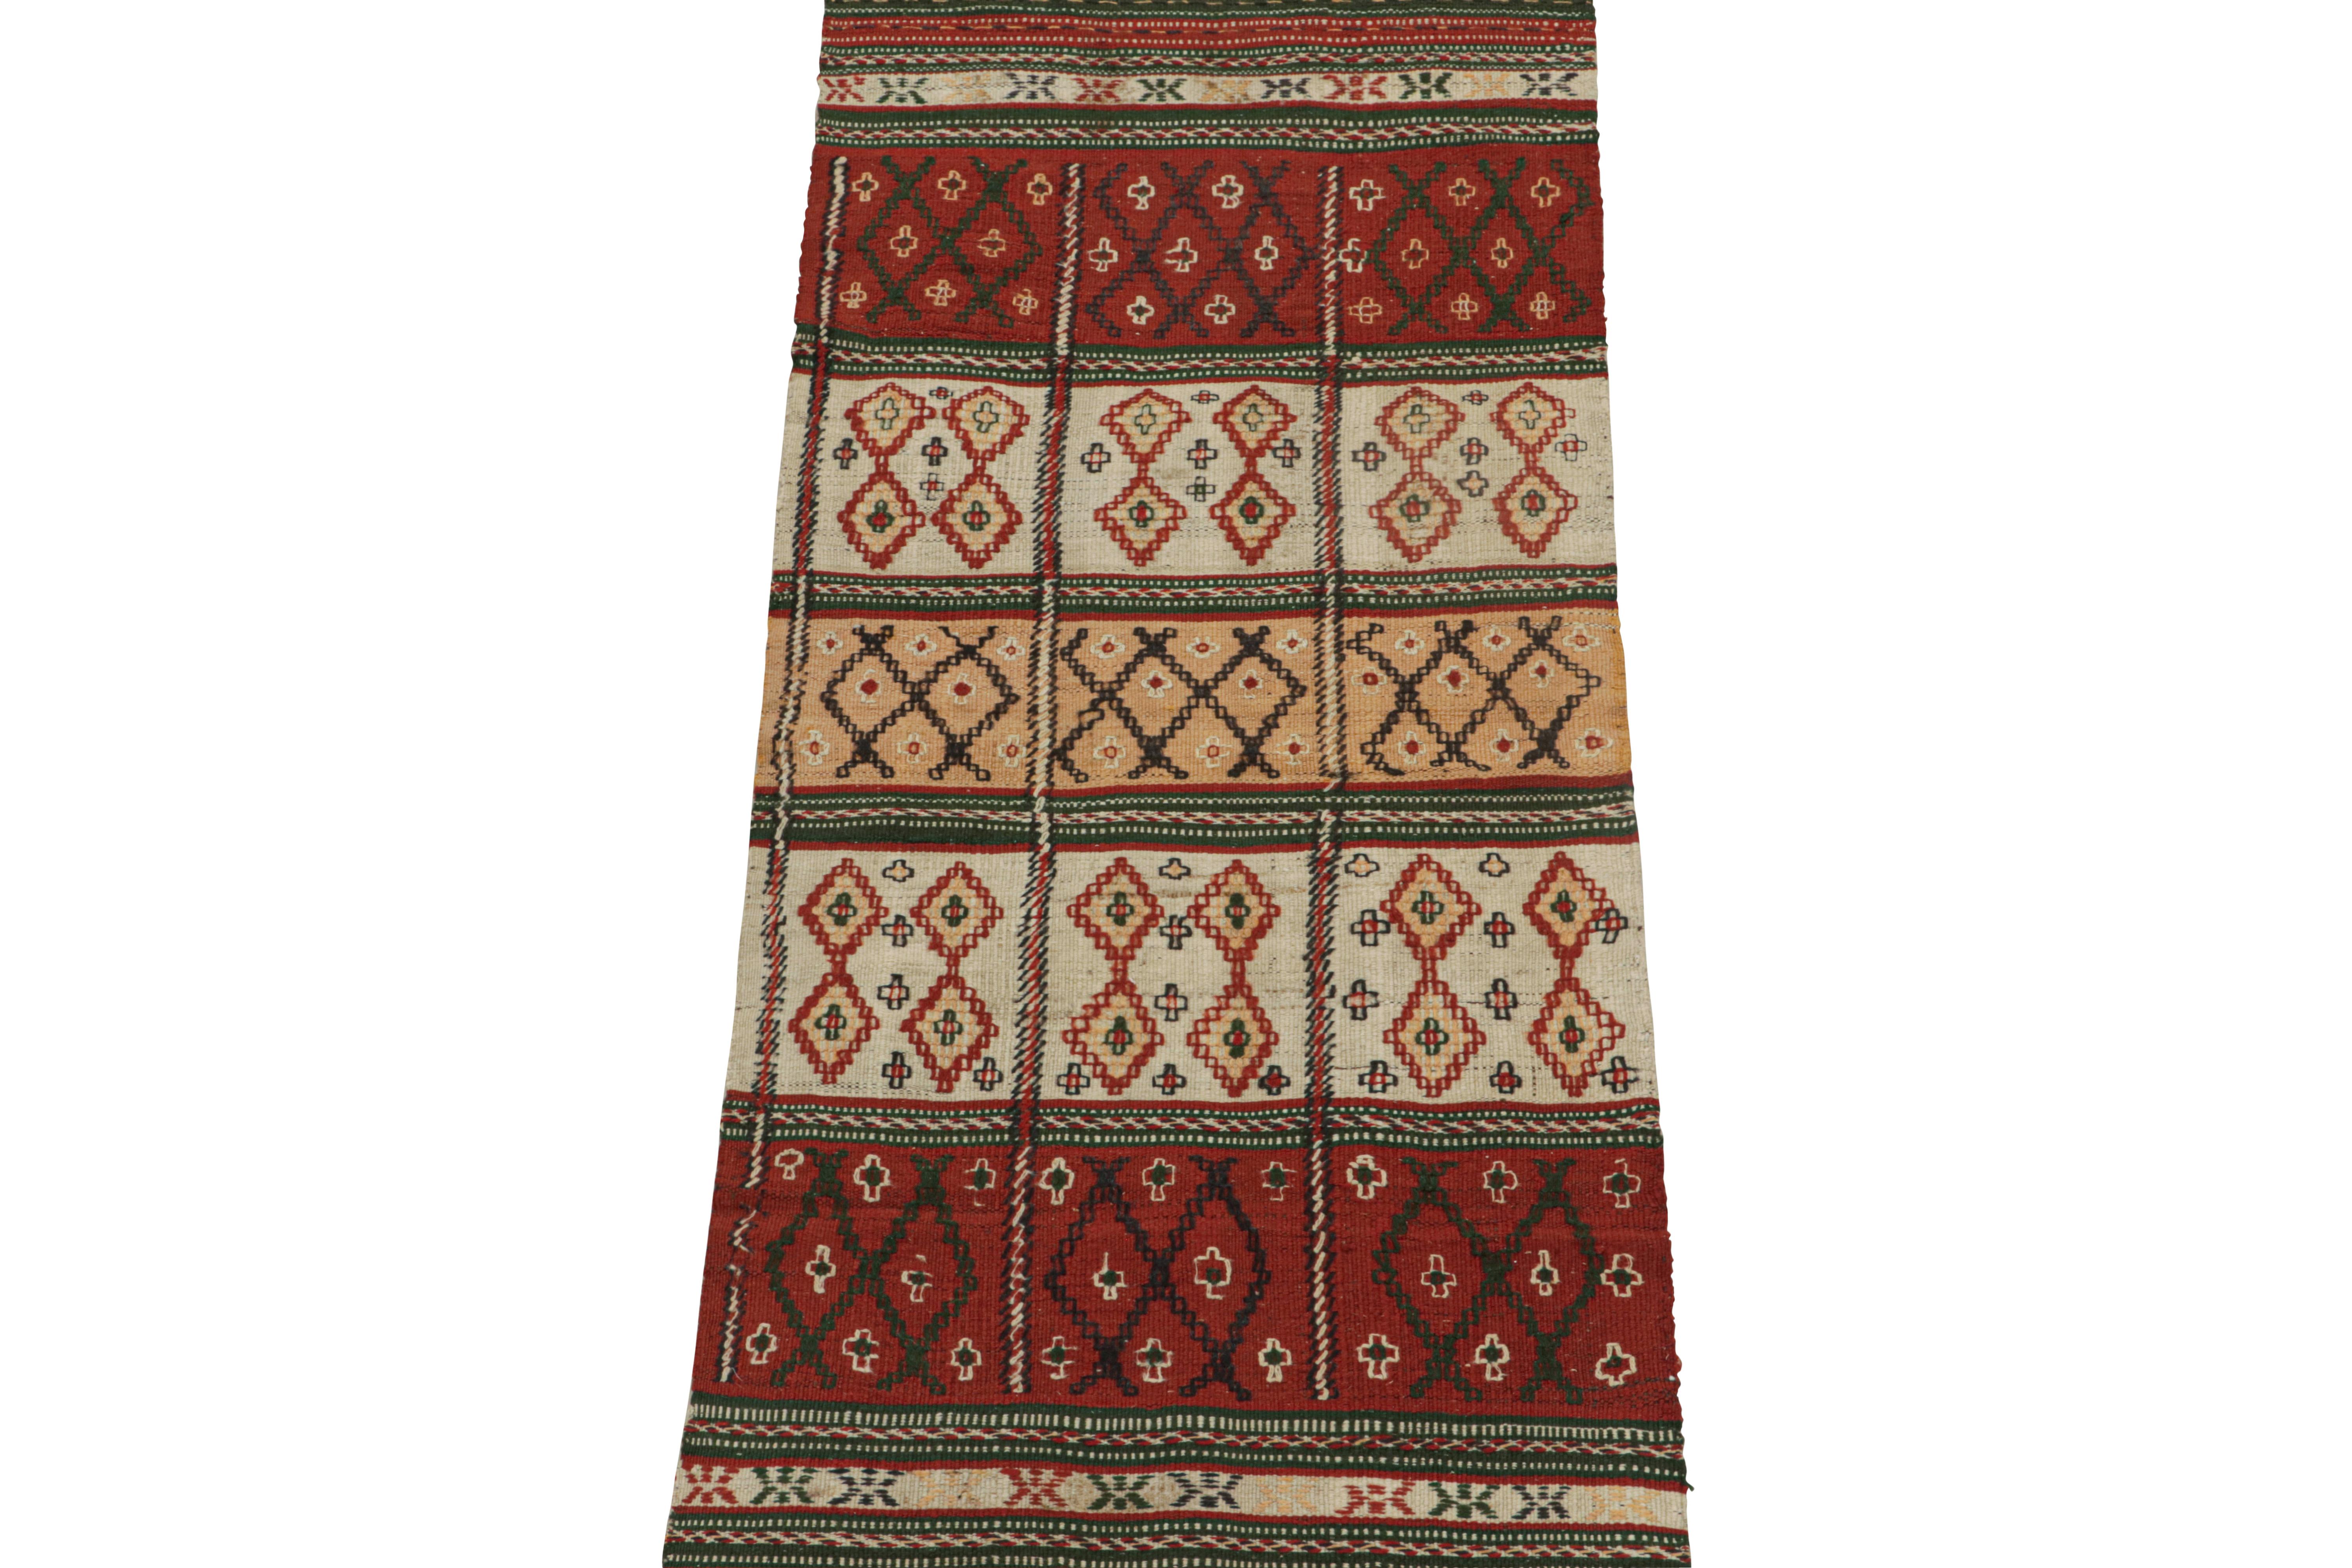 This vintage 2x6 Kilim is believed to be a tribal runner of the 1950s. 

Handwoven in wool, its design prefers geometric patterns in red, white, gold and green colorway with black accents. Keen eyes will further admire its many textural